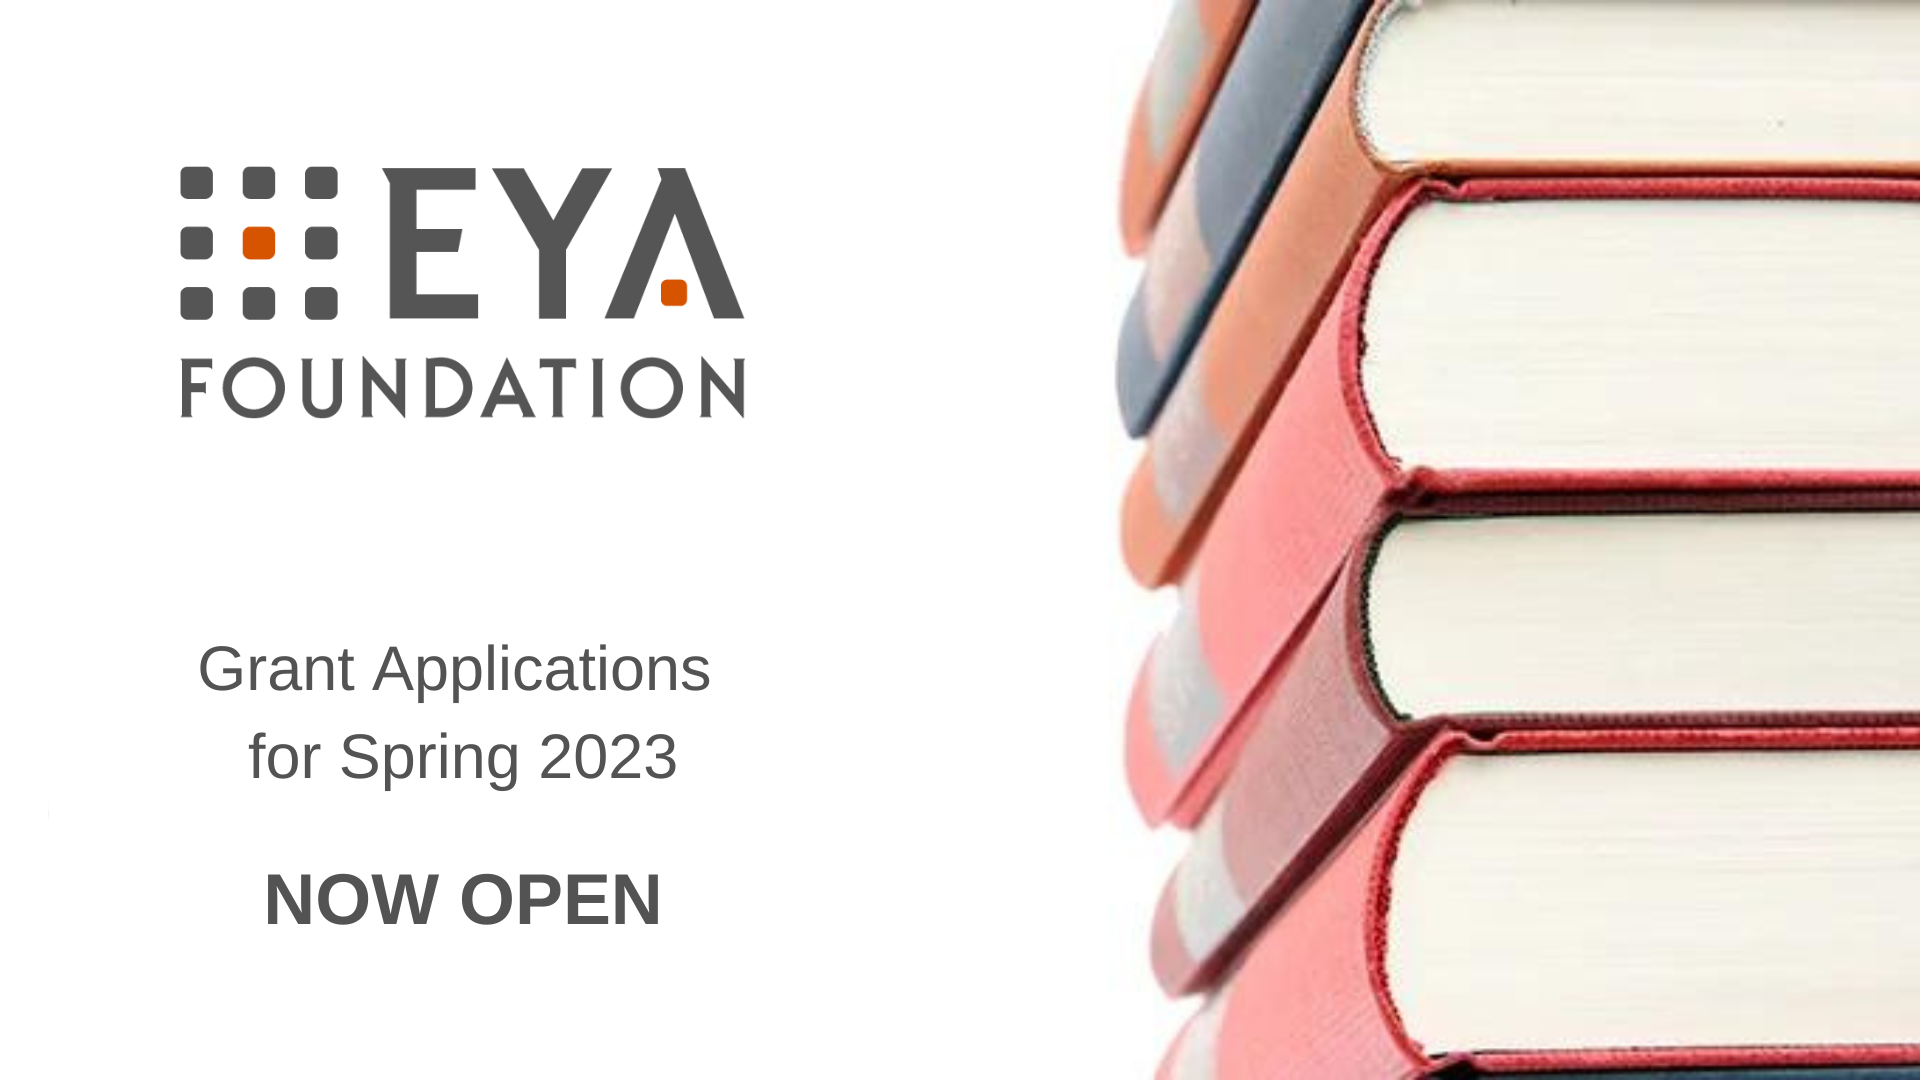 EYA Foundation Now Accepting Grant Applications